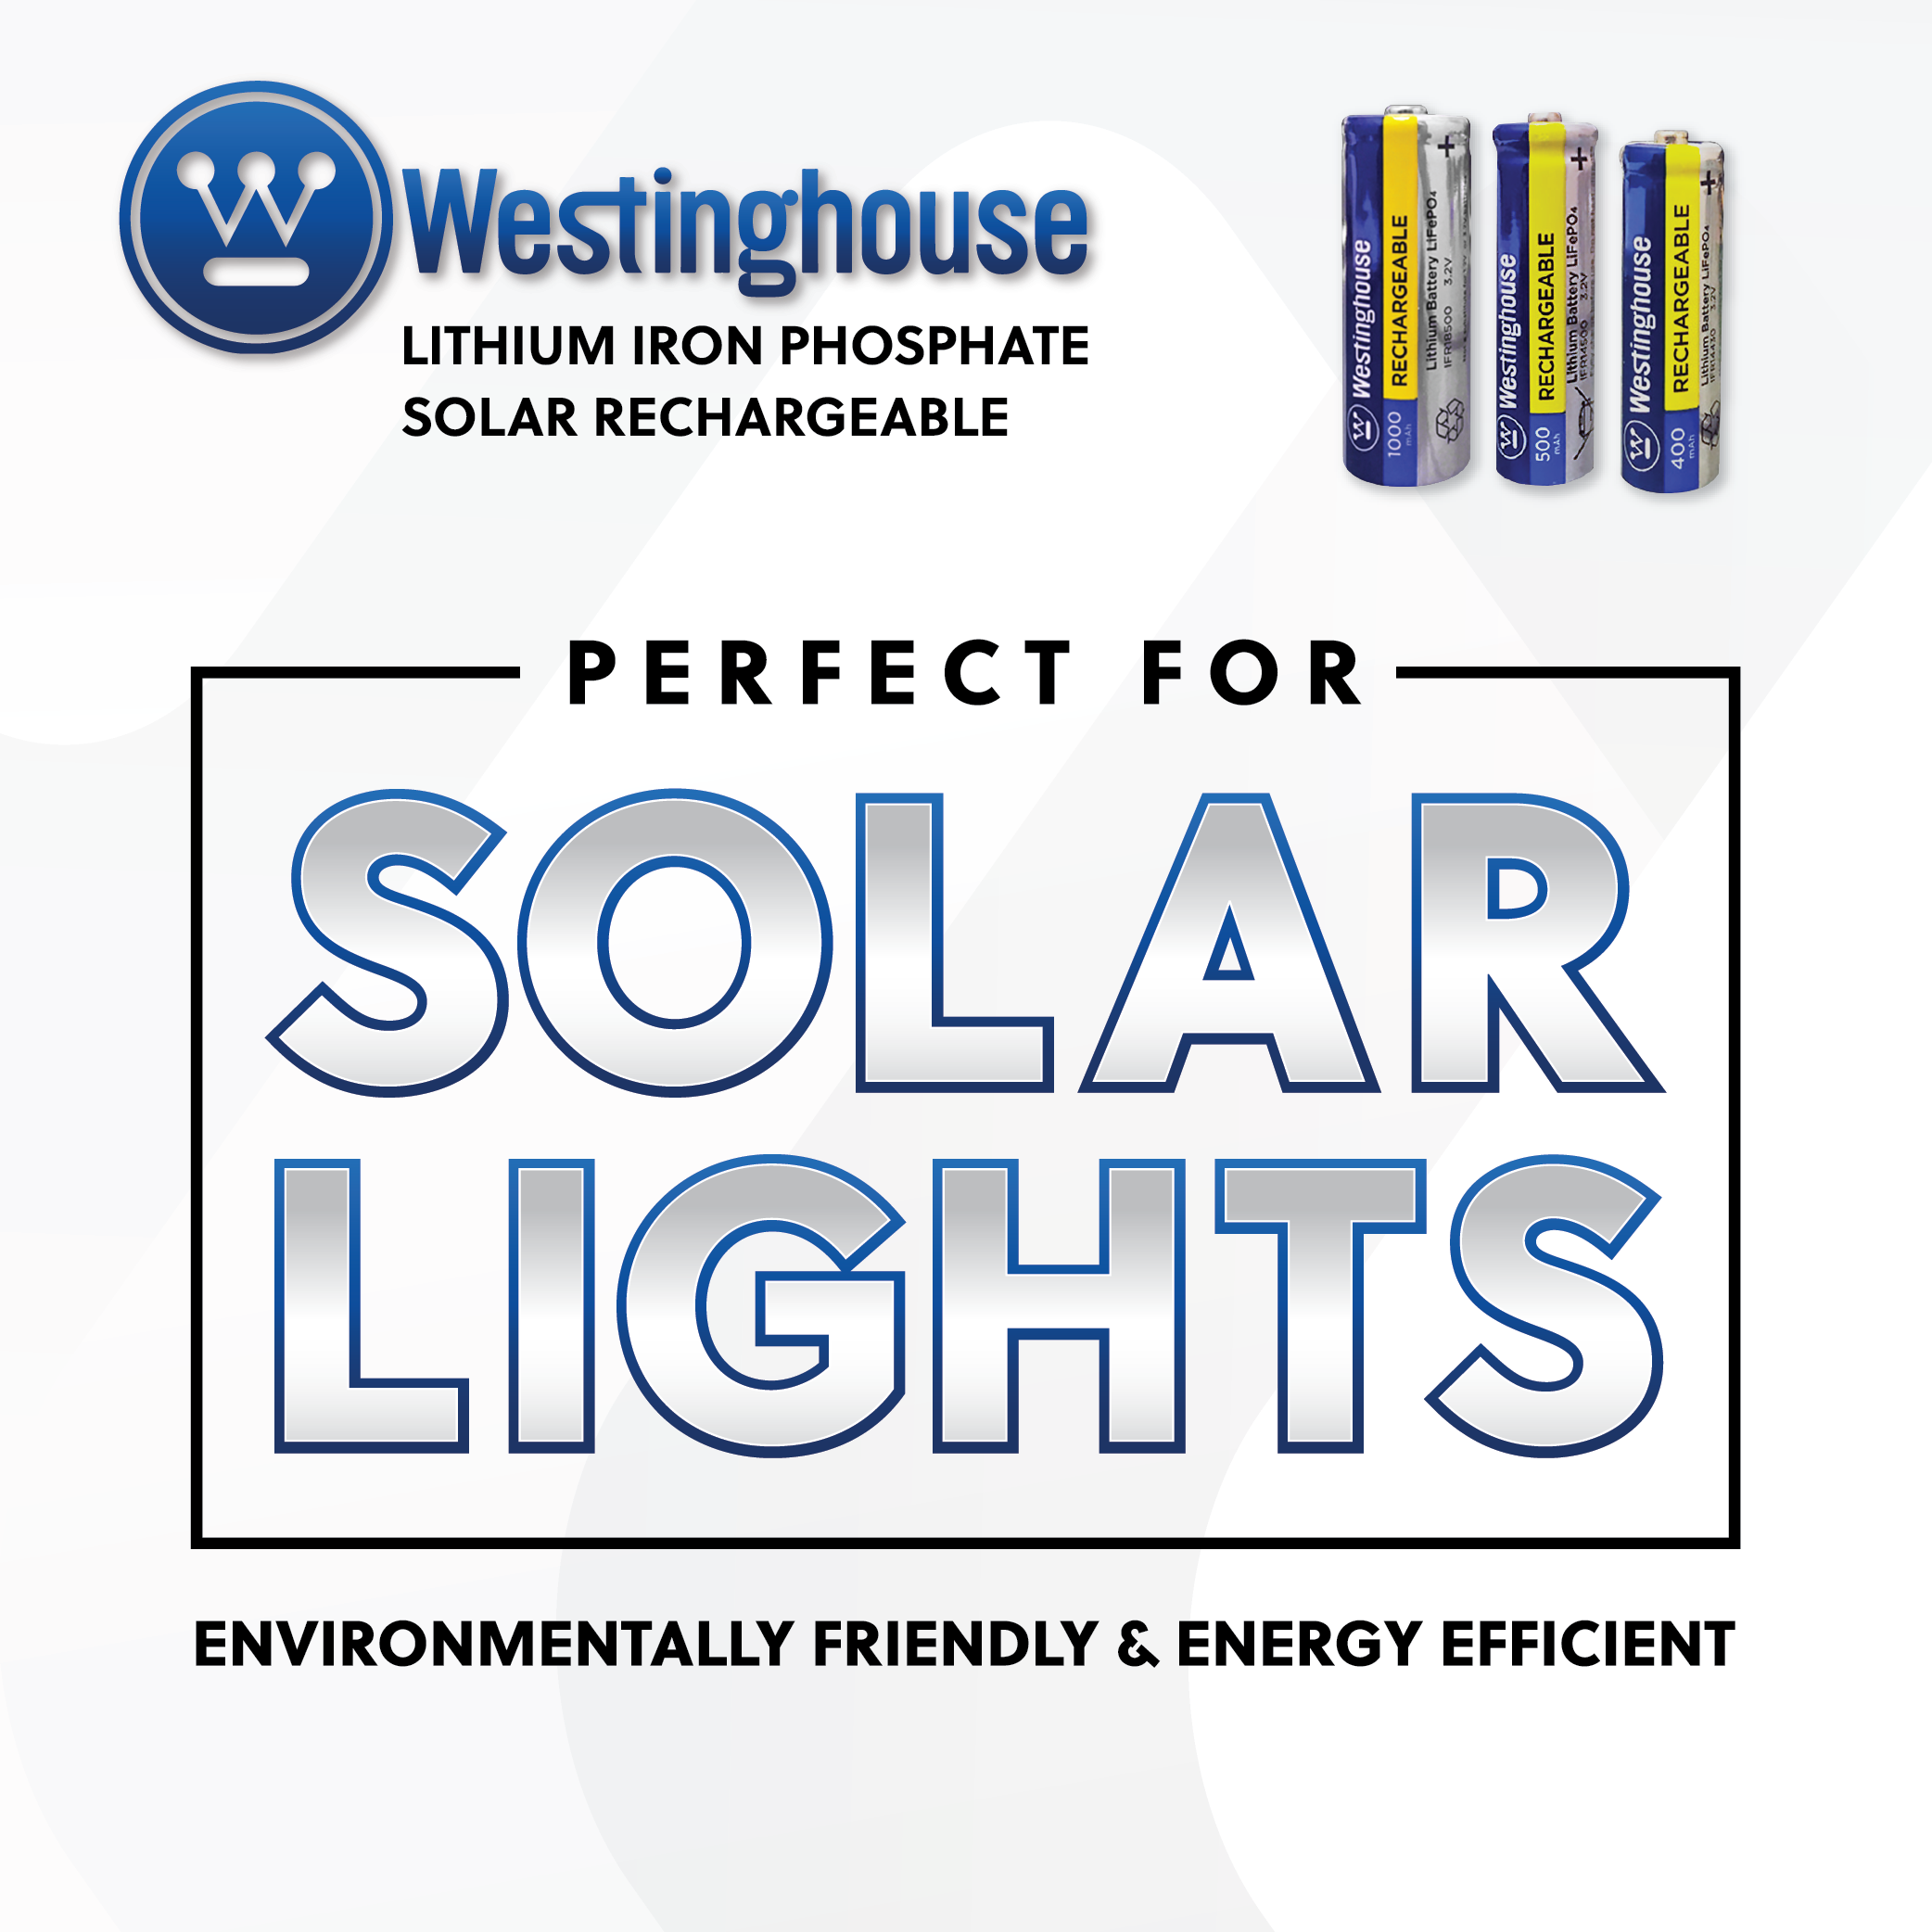 Westinghouse IFR18500 Lithium Iron Phosphate Solar Rechargeable Battery 1000mAh (Two Packaging Options)